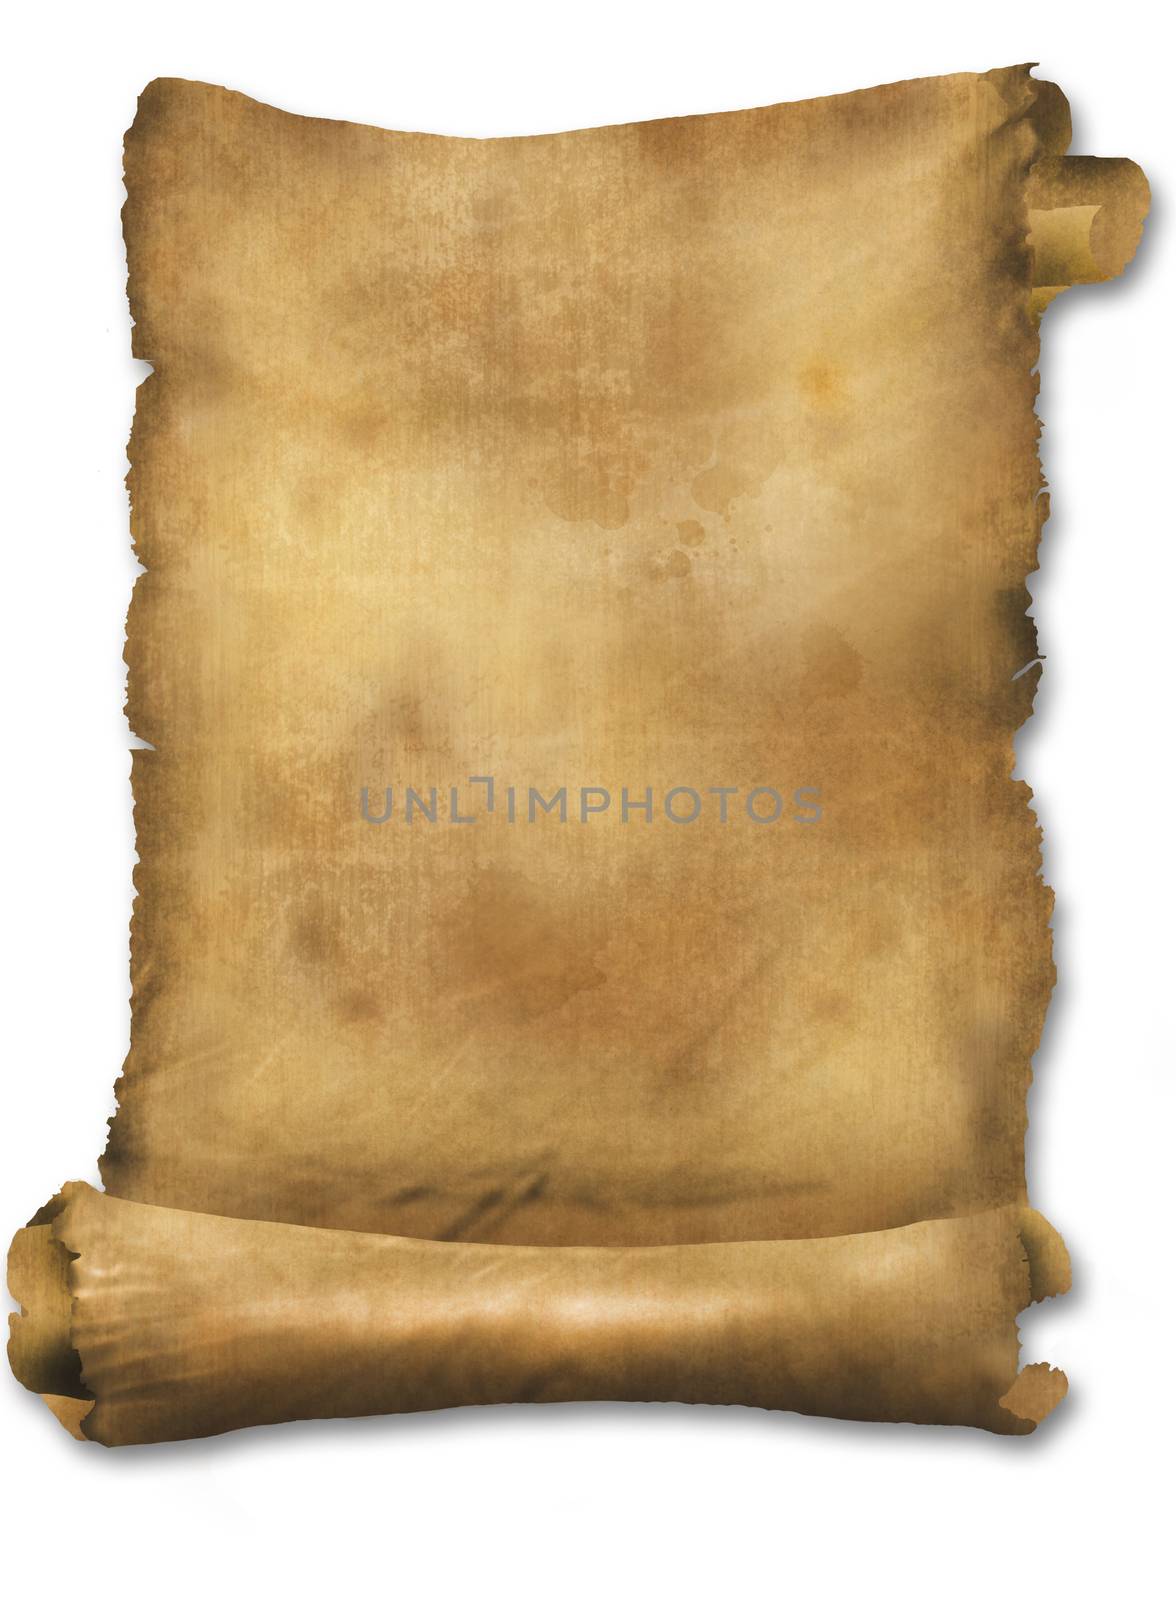 Vintage paper scroll isolated on white